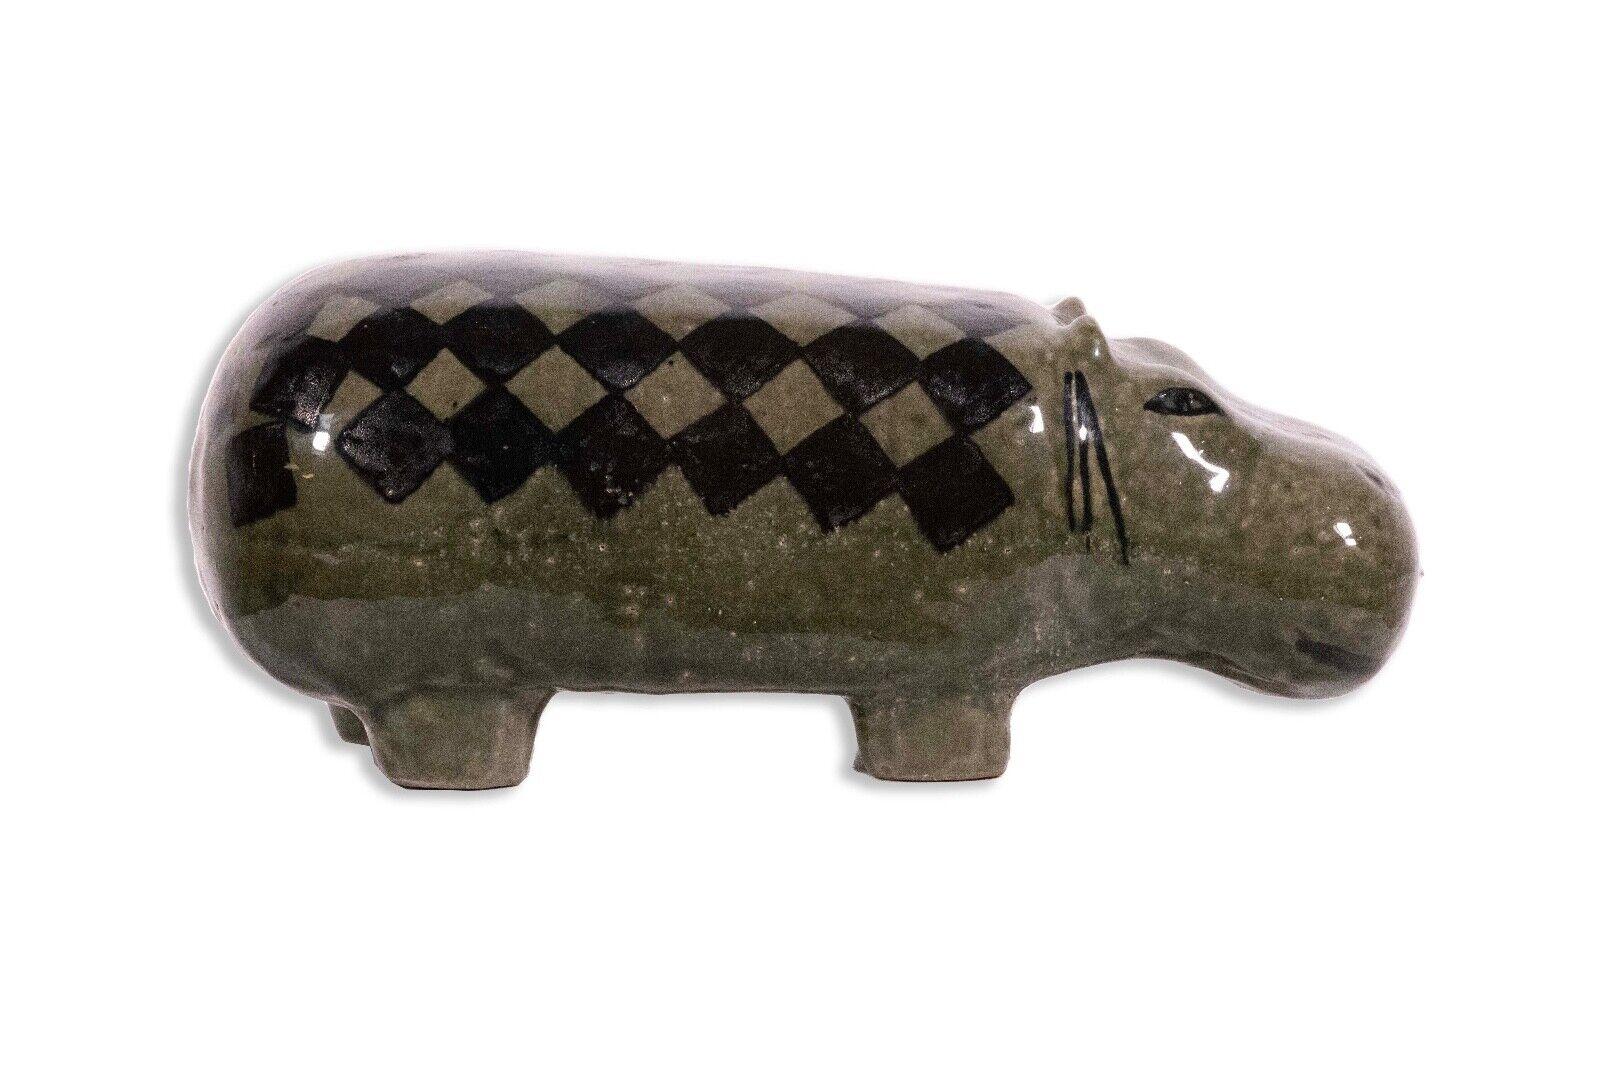 A whimsical and quintessentially modern ceramic figurine sculpture depicting a friendly hippo by Swedish ceramicist and designer Lisa Larson. Designed in 1958 for the Gustavsberg Factory and part of the 